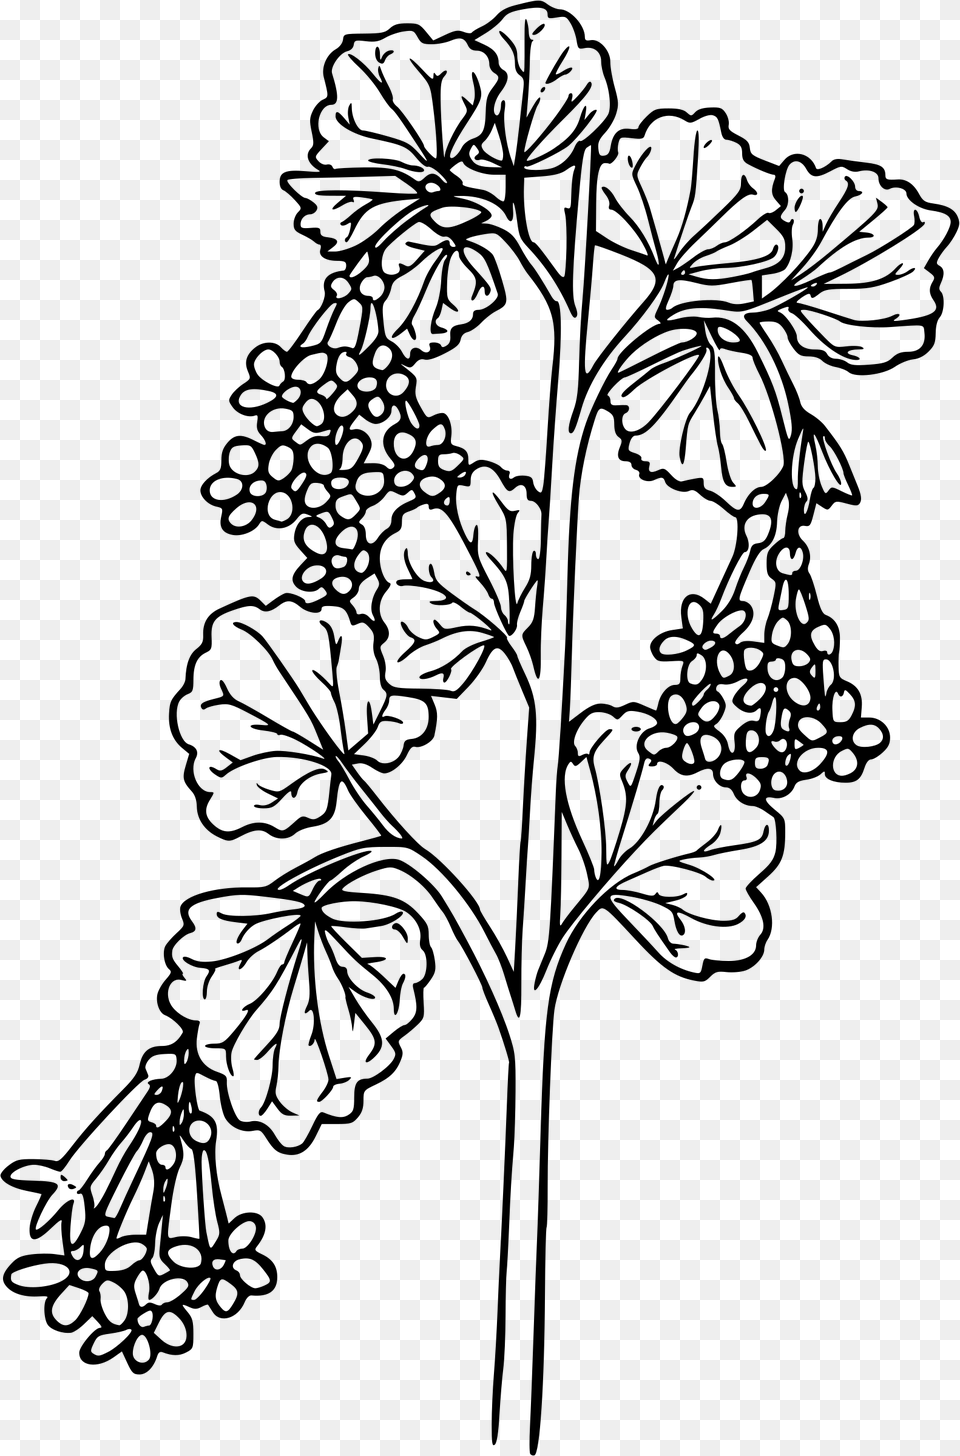 Wax Currant Clip Arts Wax Flower Line Drawings, Gray Free Transparent Png